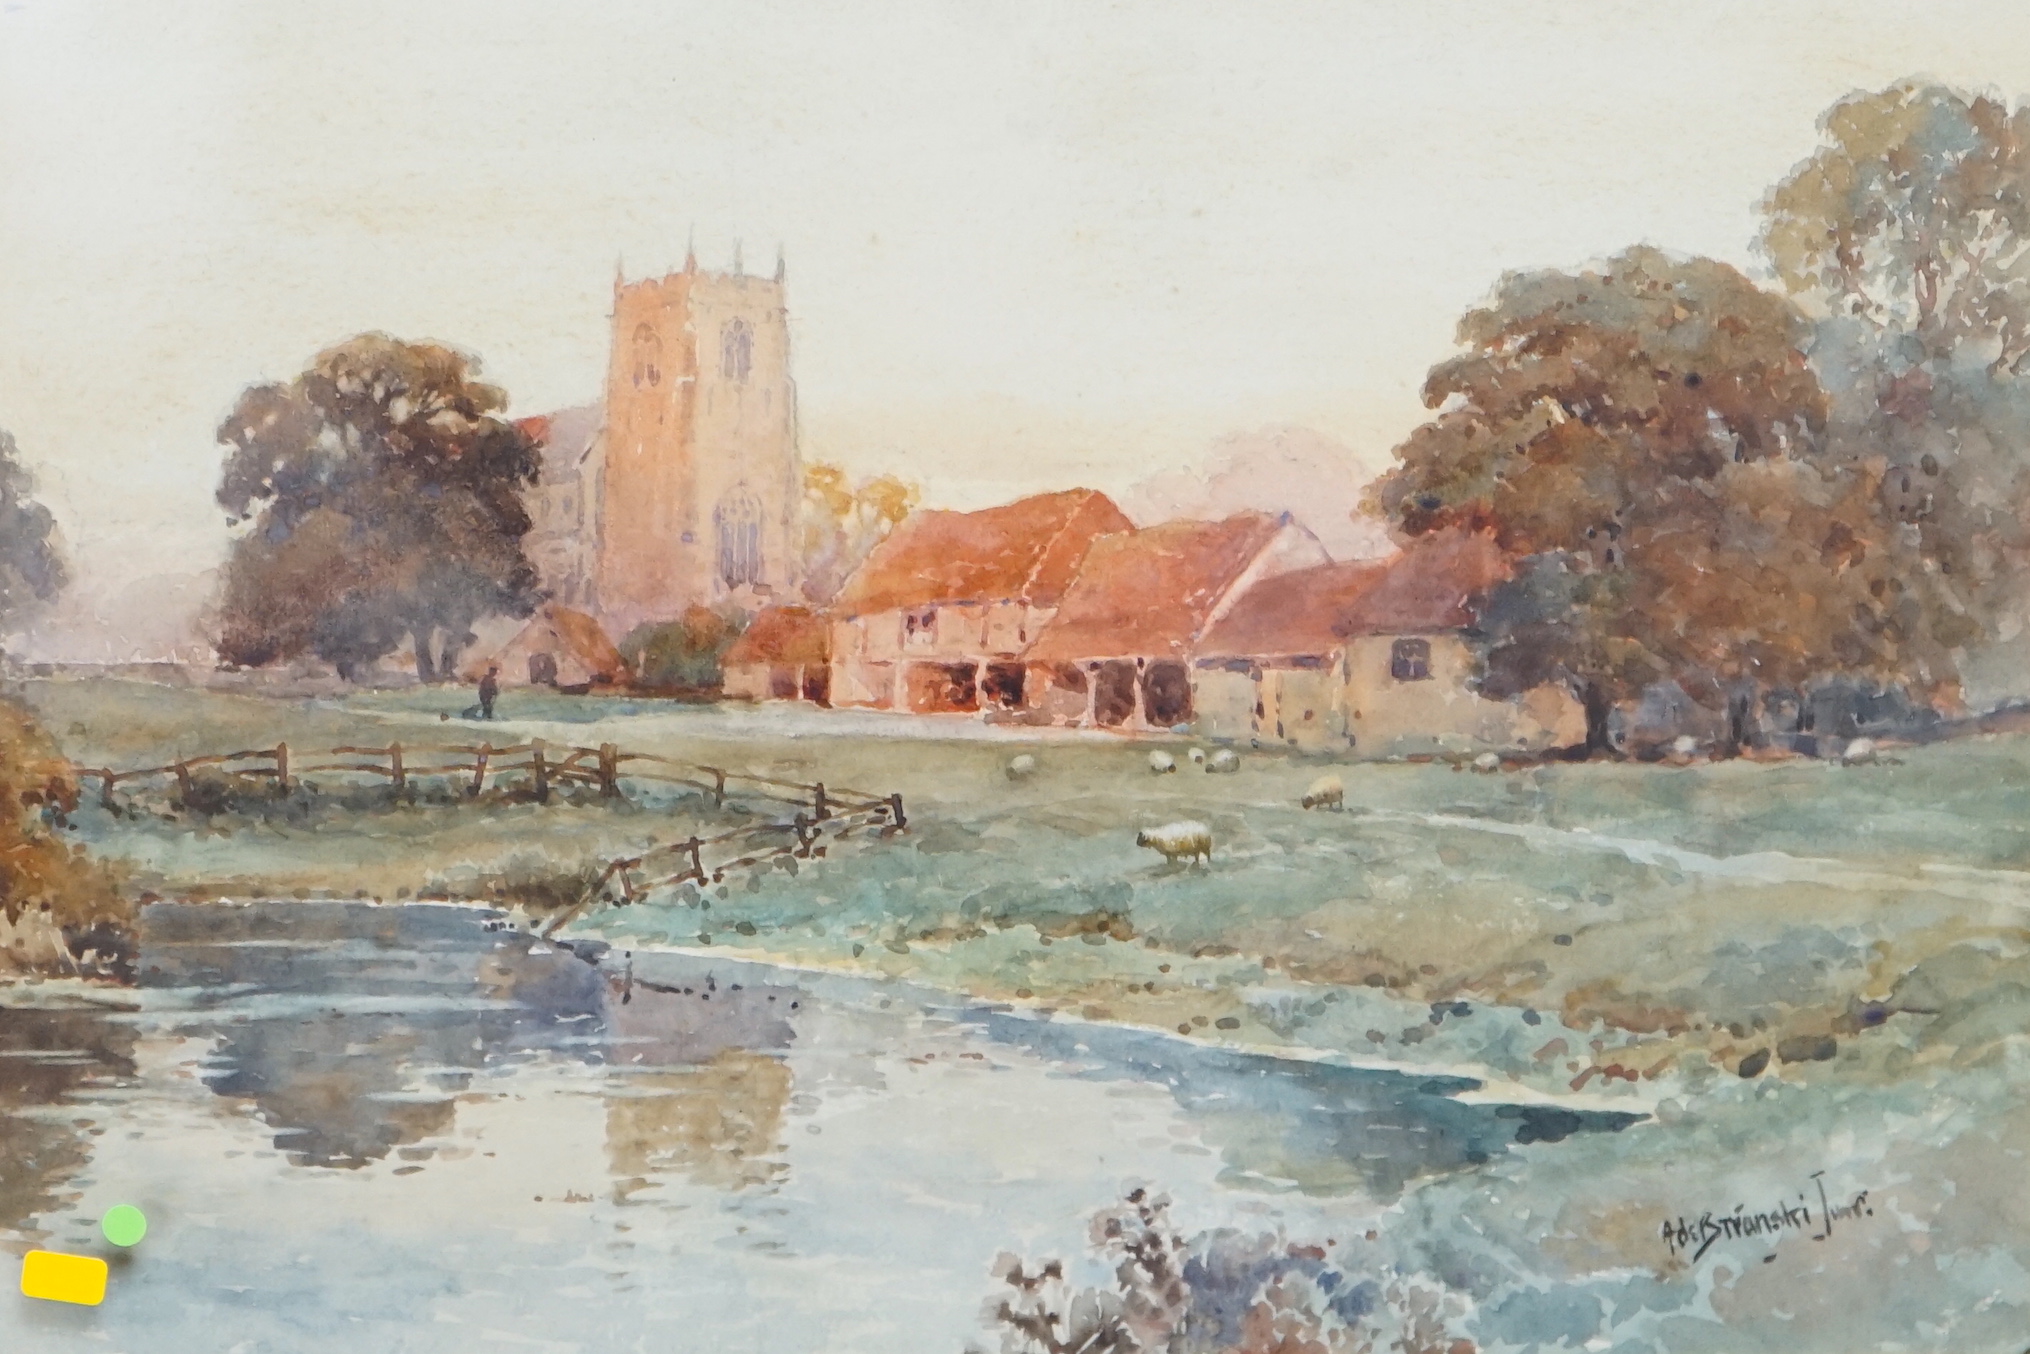 Alfred Fontville de Breanski Jnr (1877-1957), watercolour, ‘’Burnham Thorpe Village, Norfolk - Nelson’s Birthplace’’, signed, 27 x 38cm Please note this lot attracts an additional import tax of 5% on the hammer price